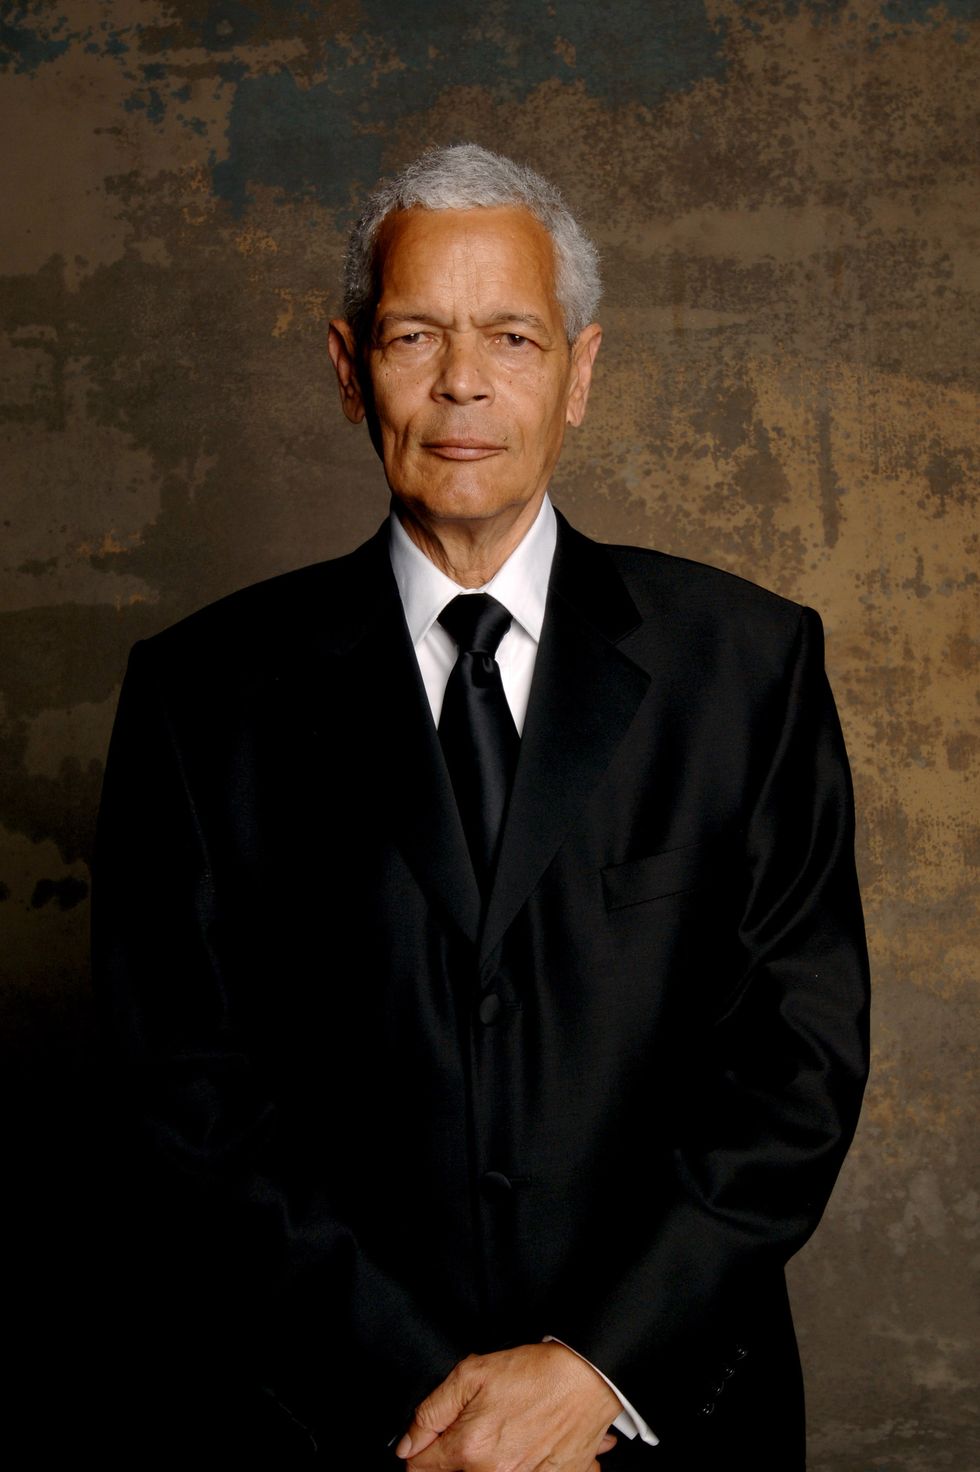 julian bond stands and looks at the camera with his hands clasped in front of him, he wears a black suit and tie with a white collared shirt